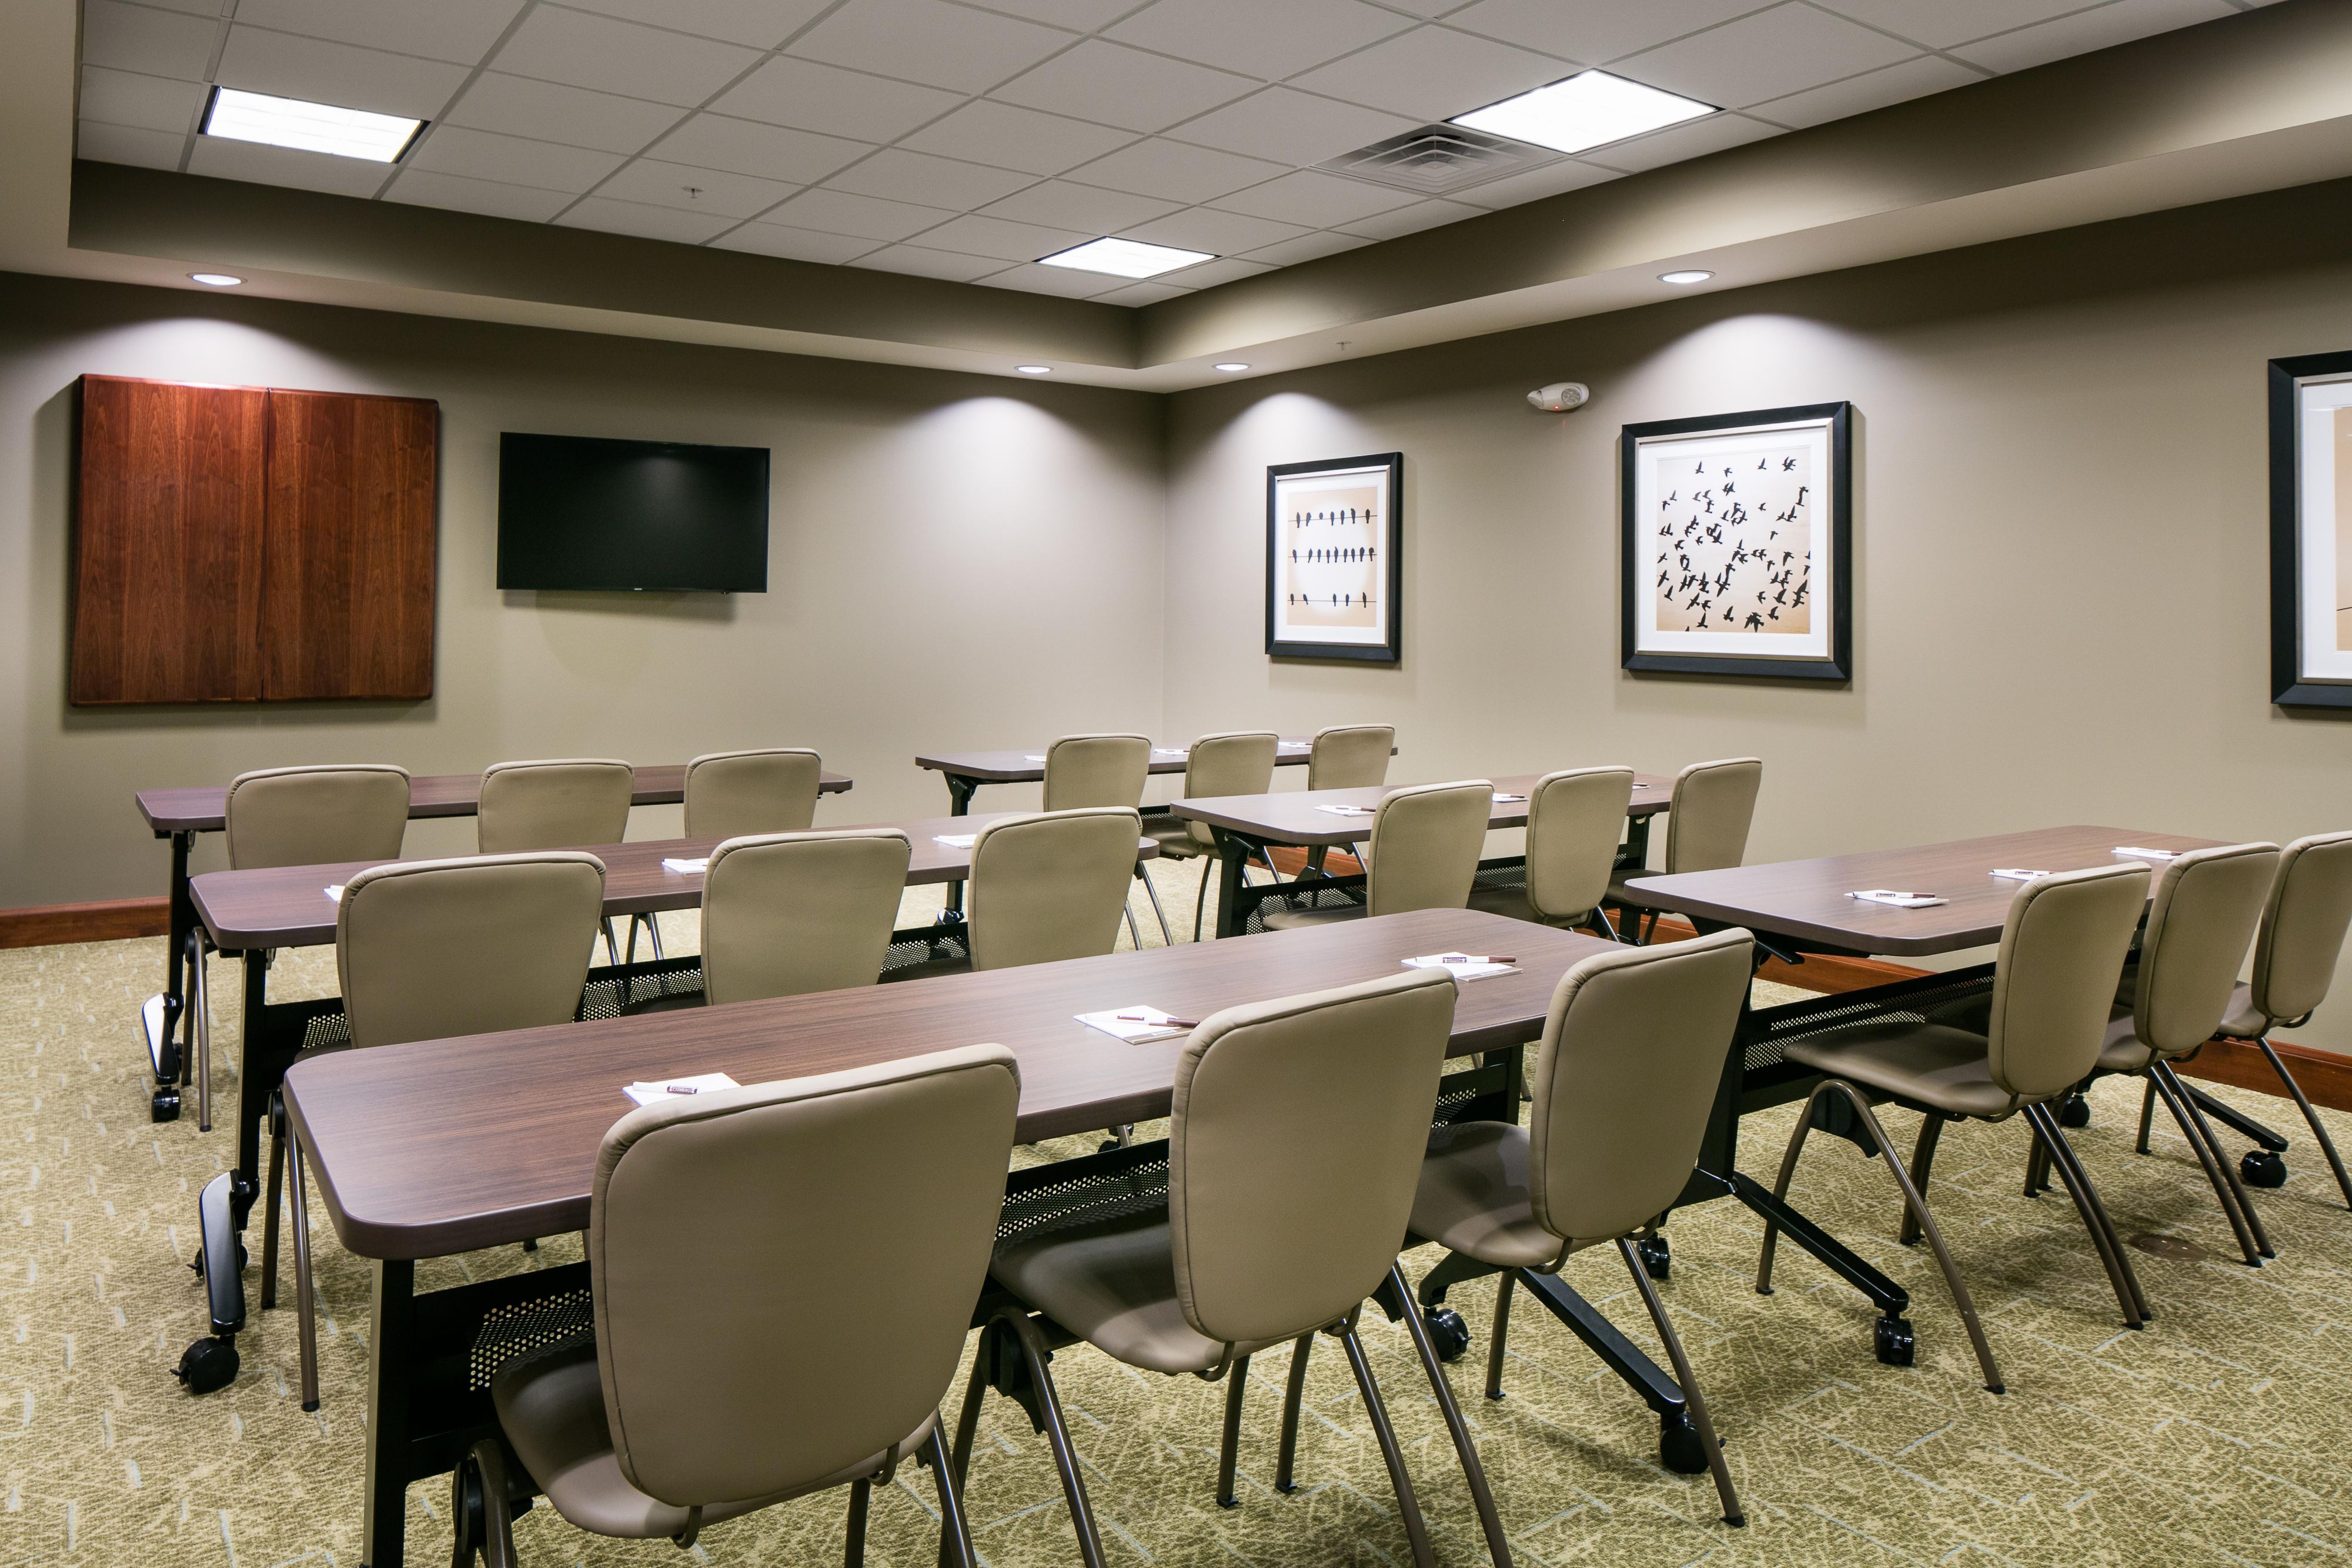 We are delighted to offer a variety of options for your next meeting or event. Our comfortable guest suites and functional meeting room will provide an ideal setting for a wide range of events.